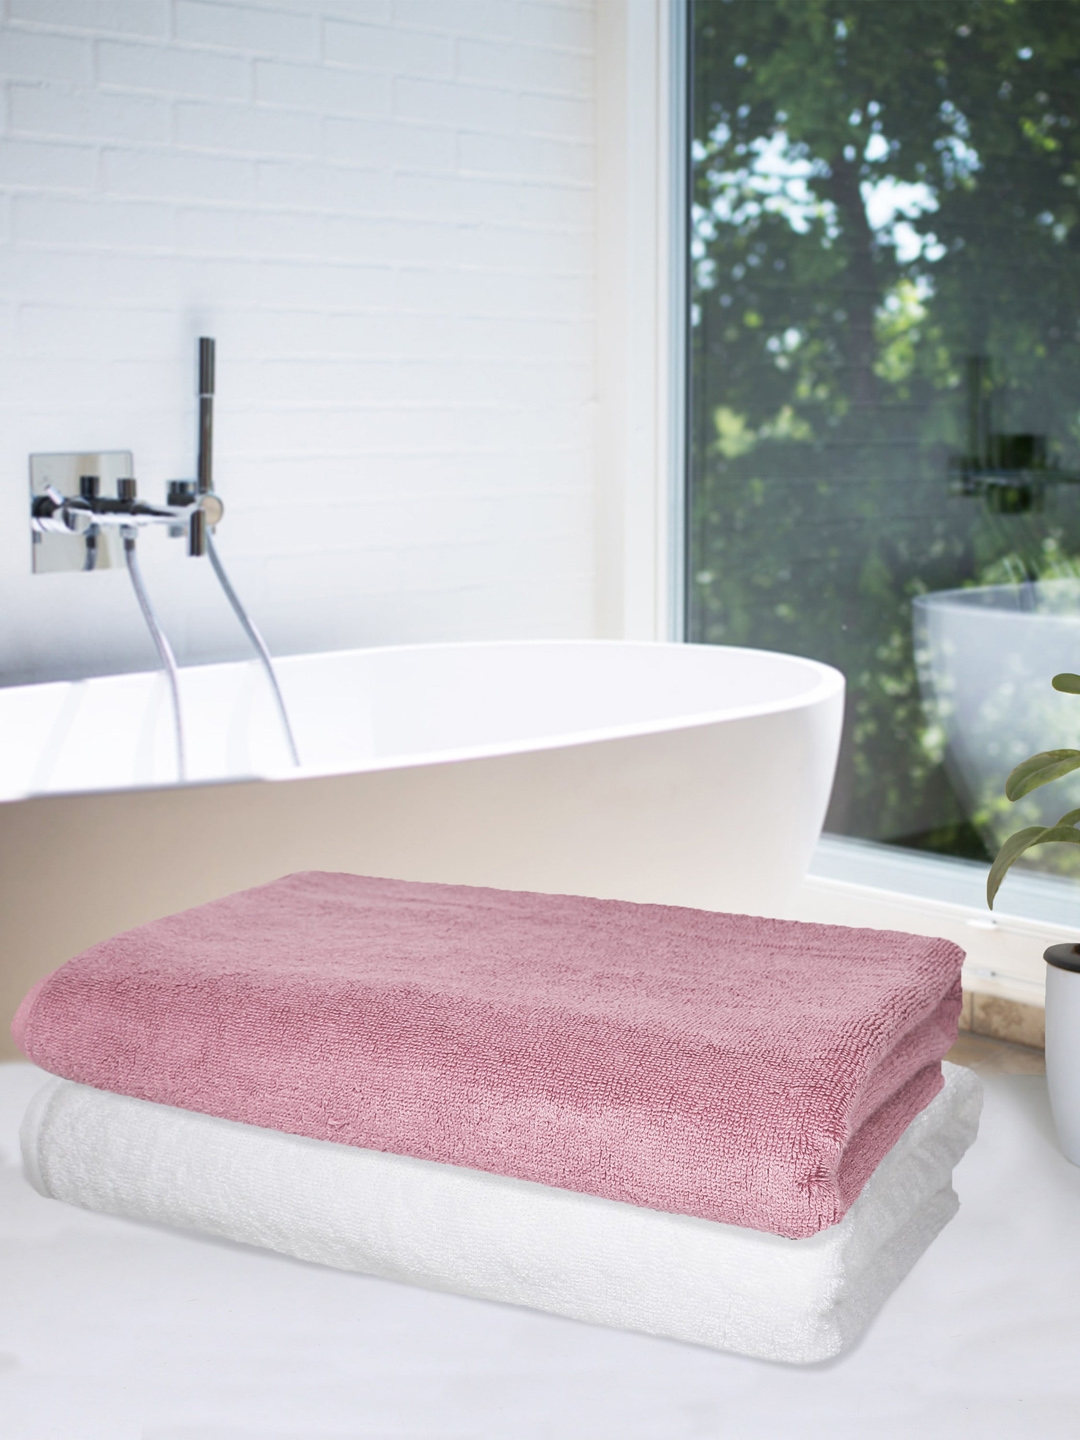 Heelium Set Of 2 Peach-Colored & White Solid 600 GSM Bamboo Bath Towels